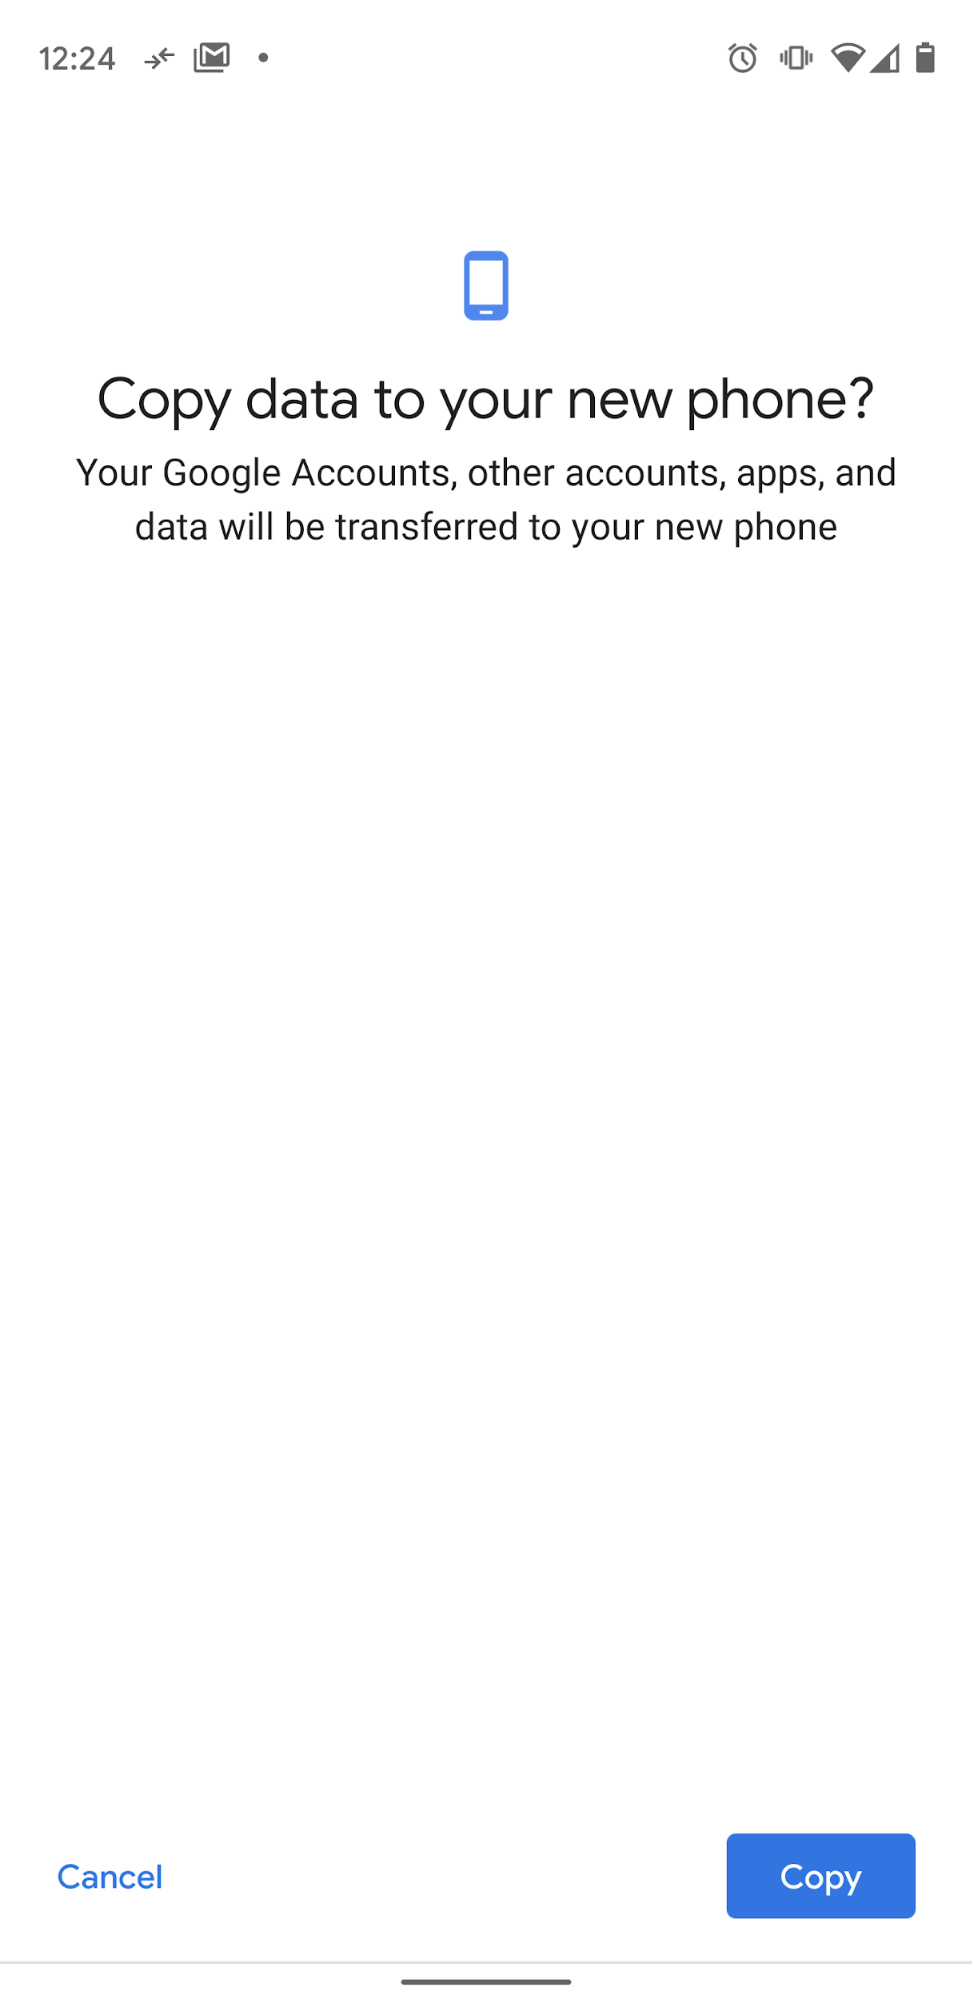 Copy data to your new phone.